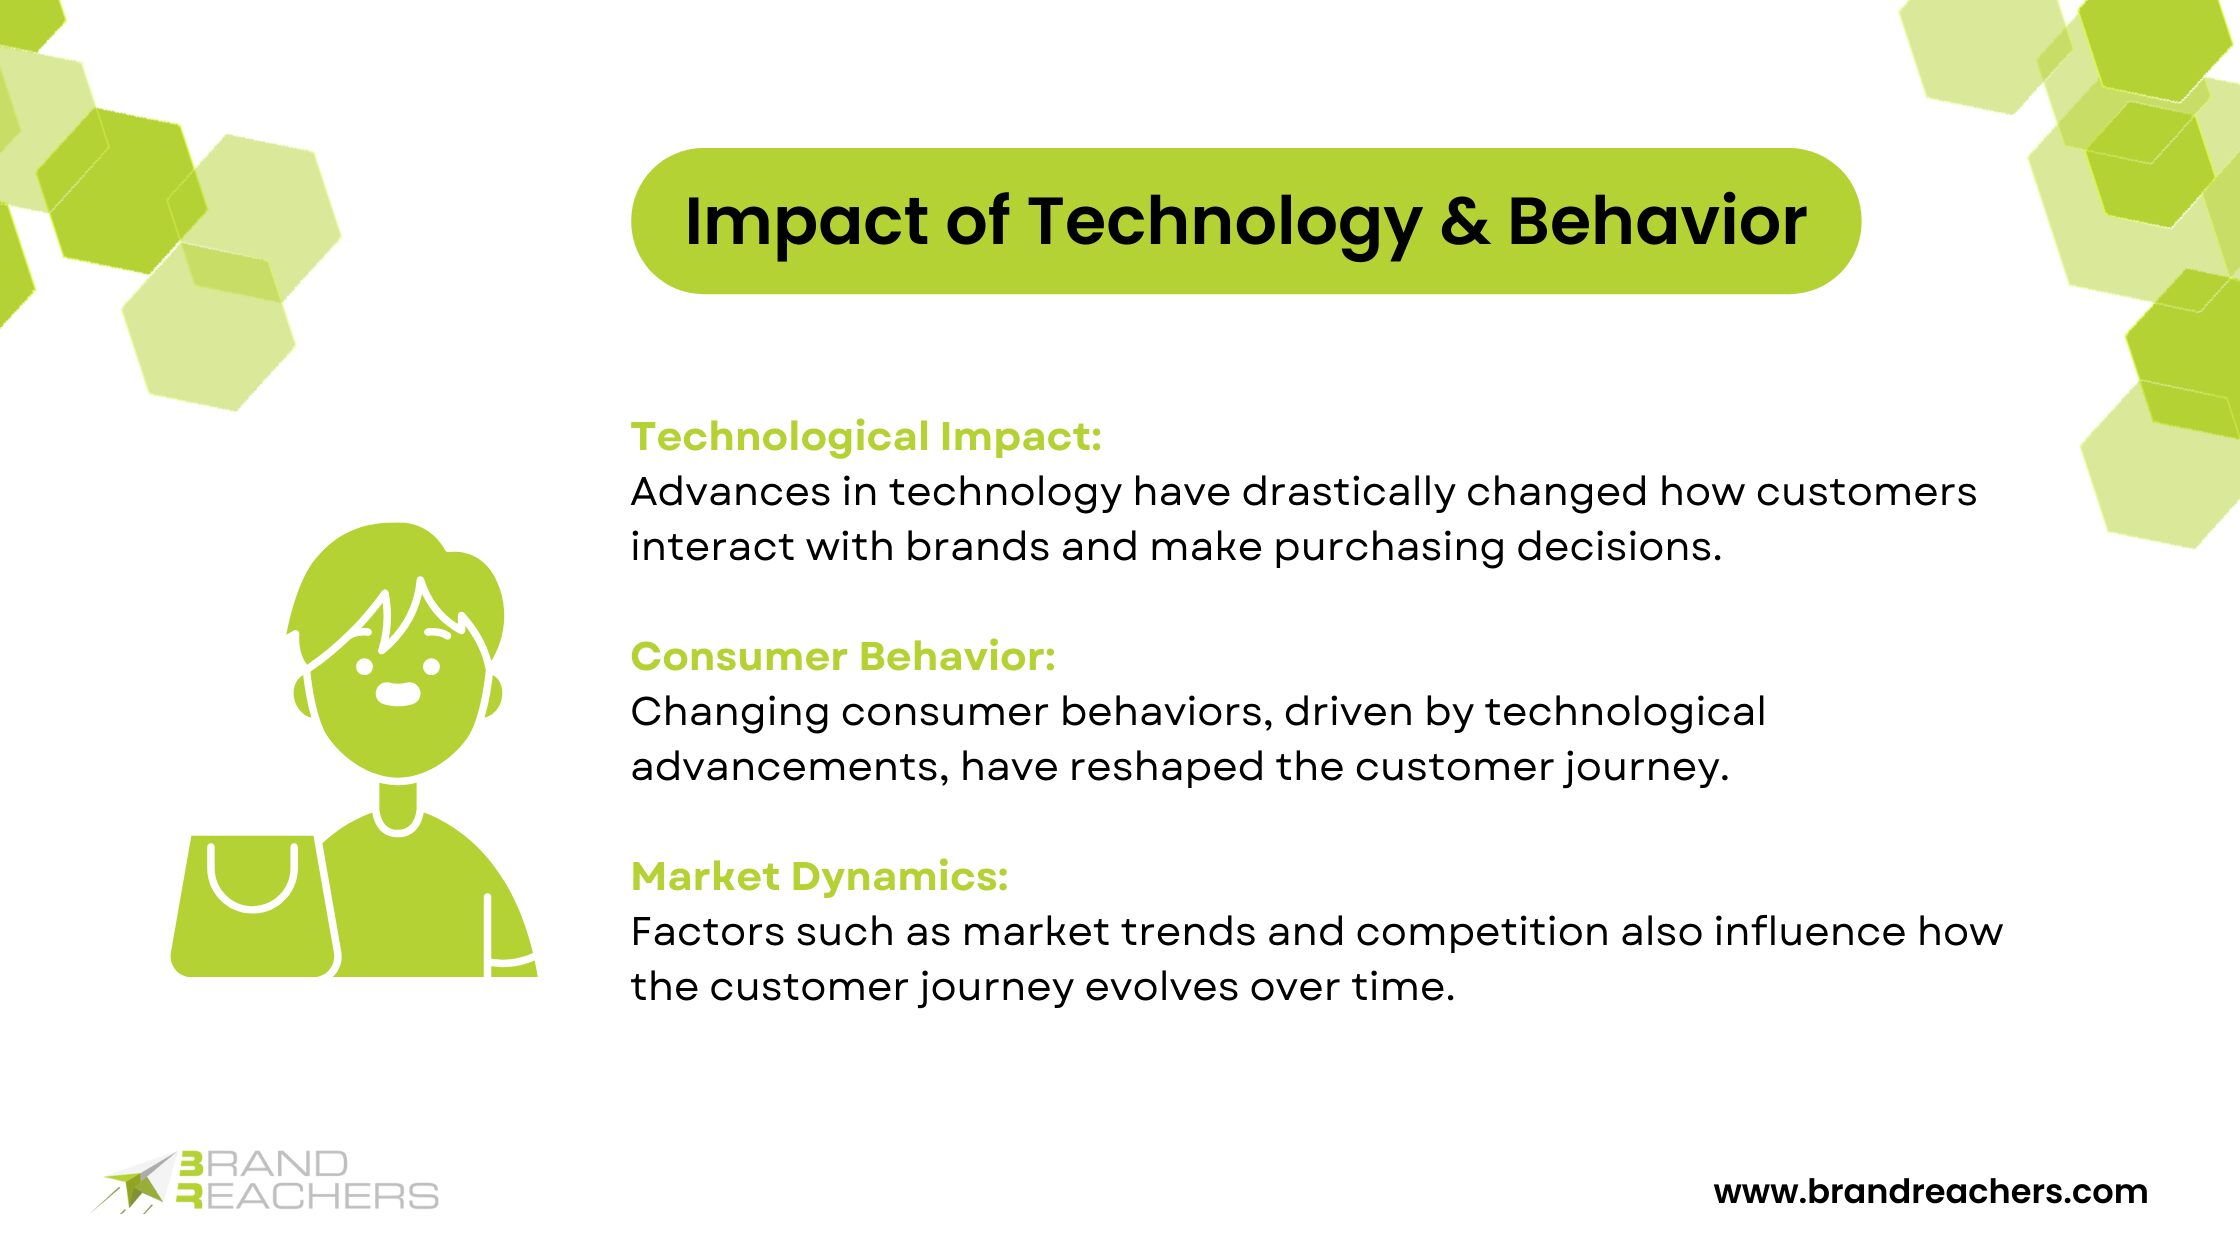 Transformative Trends: Mapping the Evolution of Customer Journey While the customer's journey is very different today than it was years ago, it is because of the way advances in the technology world, change in consumer behavior and changes in market dynamics have impacted it. Here's a brief overview of how the customer journey has evolved: Unlocking the Customer Journey: Impact of Technology & Behavior Traditional Linear Journey: In the past days, the customer journey was drawn as a line with various touchpoints where the customers move from awareness, consideration, purchase, and finally towards loyalty. Therefore, this model assumed that consumers moved through phases of a sequence in a predictable way. Digital Revolution: The web and digital technologies change the customer experience in the shopping journey. Consumers nowadays are receptive to information because of technology allowing them to research and make their own selections to buy. This gave way to new accesses such as search engines, social media, and reviews online. Multi-Channel Approach: Initially, this happened as customers began to use more than one channel (be it devices of channels) to talk to the brands. So, marketers then adopted a multi-channel approach. This particular effort meant to bring the customer experience in line with the best practices when it comes to the touchpoints that are online and offline alike while preserving a continuous flow of the journey. Omni-Channel Experience: Smartphones and mobile applications have disseminated so rapidly, that attention to the multichannel experience where consumer touchpoints are connected emerged. This approach targets to create the best engaging channels and ensure that customers have a standard experience with consistent messaging and personalized interactions, which means moving from one channel to another is hassle-free to them. Customer-Centricity: Today, the personalized focus of customer journey has enhanced in order to meet the requirements and expectations of each single customer in the market. The brands are utilizing data analytics coupled with artificial intelligence to understand customer behavior more in-depth and, in turn, they are offering persona specific experiences throughout the whole journey. Experience Economy: With the experience economy, the customer process expands behind the purchase point and includes the whole client experience. Most marketers today are investing in crafting memorable experiences that thrill customers and earn lasting loyalty. Post-Purchase Engagement: This is then added to the experience economy idea and brands are increasingly looking into how post-purchase engagement is handled. Such an interaction concerns a long-term keeping of touch with customers with help of regular emails, messages, and targeted product suggestions. In general, the store process has developed from being a straight line to a dynamic and inter-related experience centering on a customer. Technology is becoming more and more sophisticated and on the other hand, consumers' expectations are growing every day. Accordingly, businesses need to refine their marketing strategies in order to fulfill the retail customers' journey.